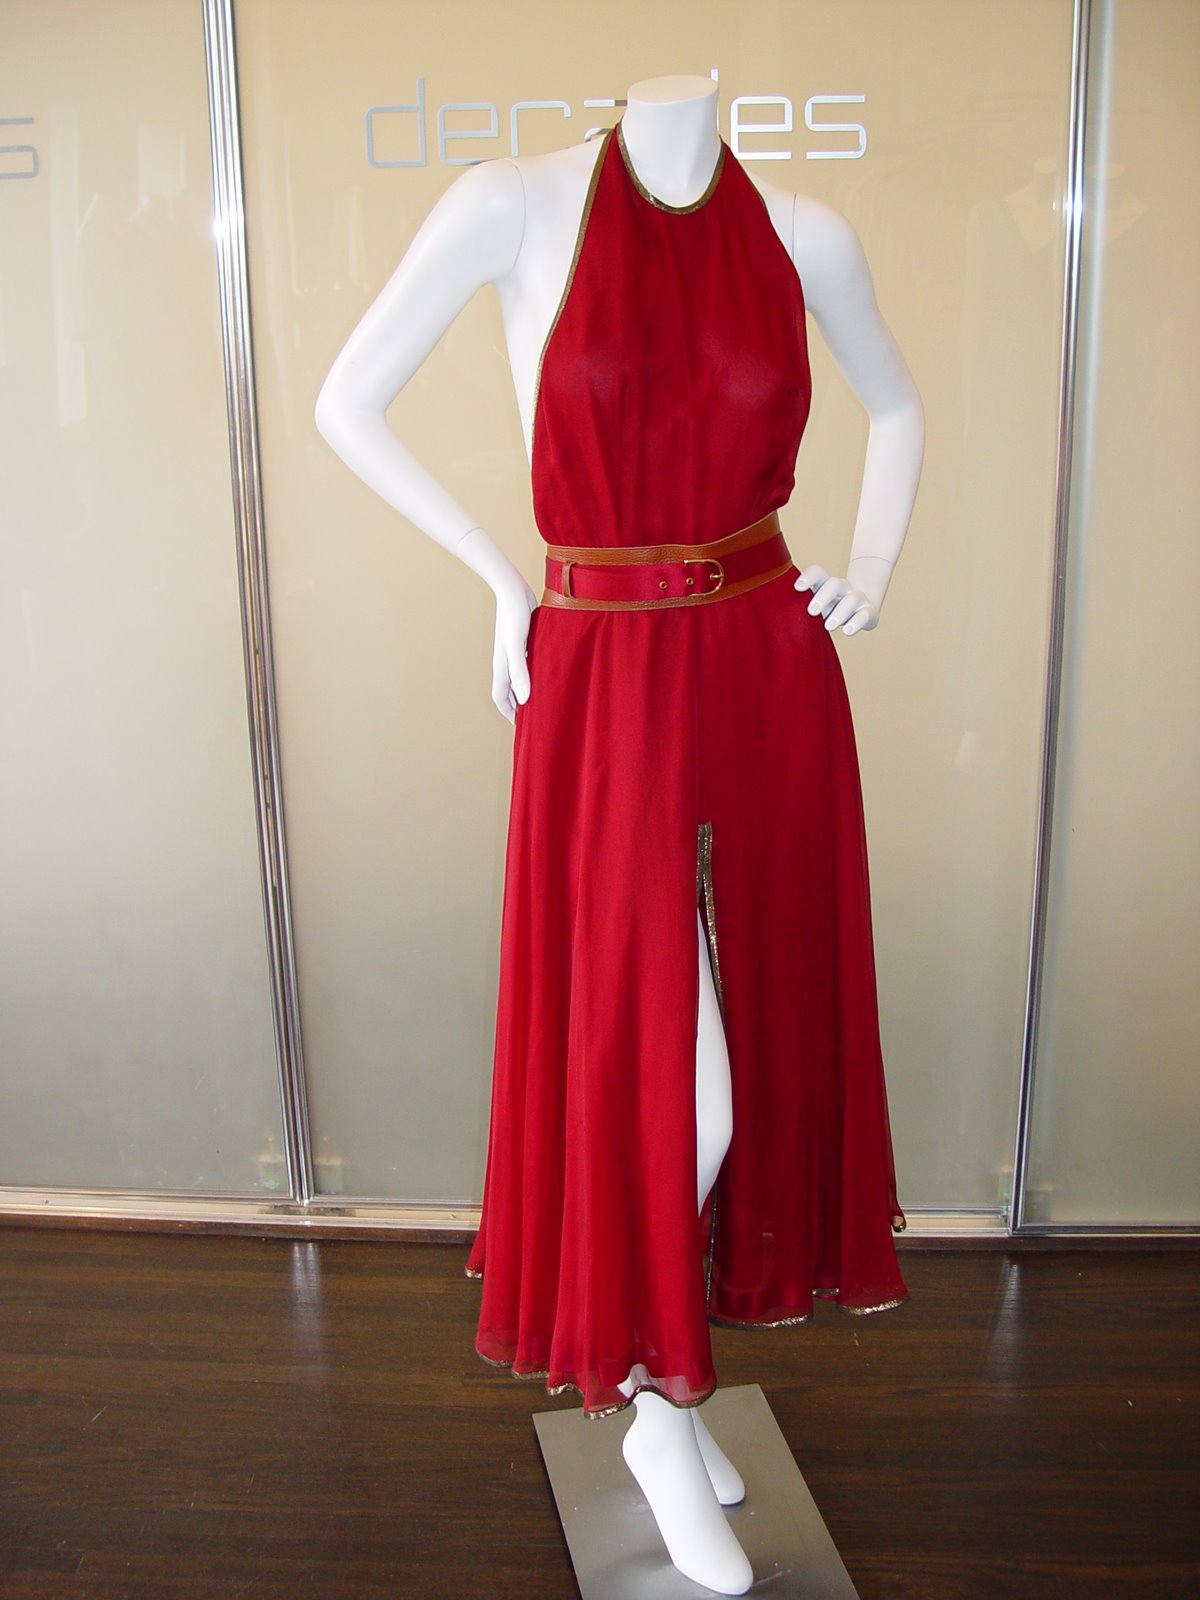 [GEOFFREY+BEENE+EARLY+90S+WINE+CHIFFON+HALTER+GOWN+WITH+WITH+BRONZE+GOLD+LAME+TRIM+AND+UNUSUAL+BELT+AND+HIGH+SLIT+SKIRT+SIZE+6.JPG.JPG]